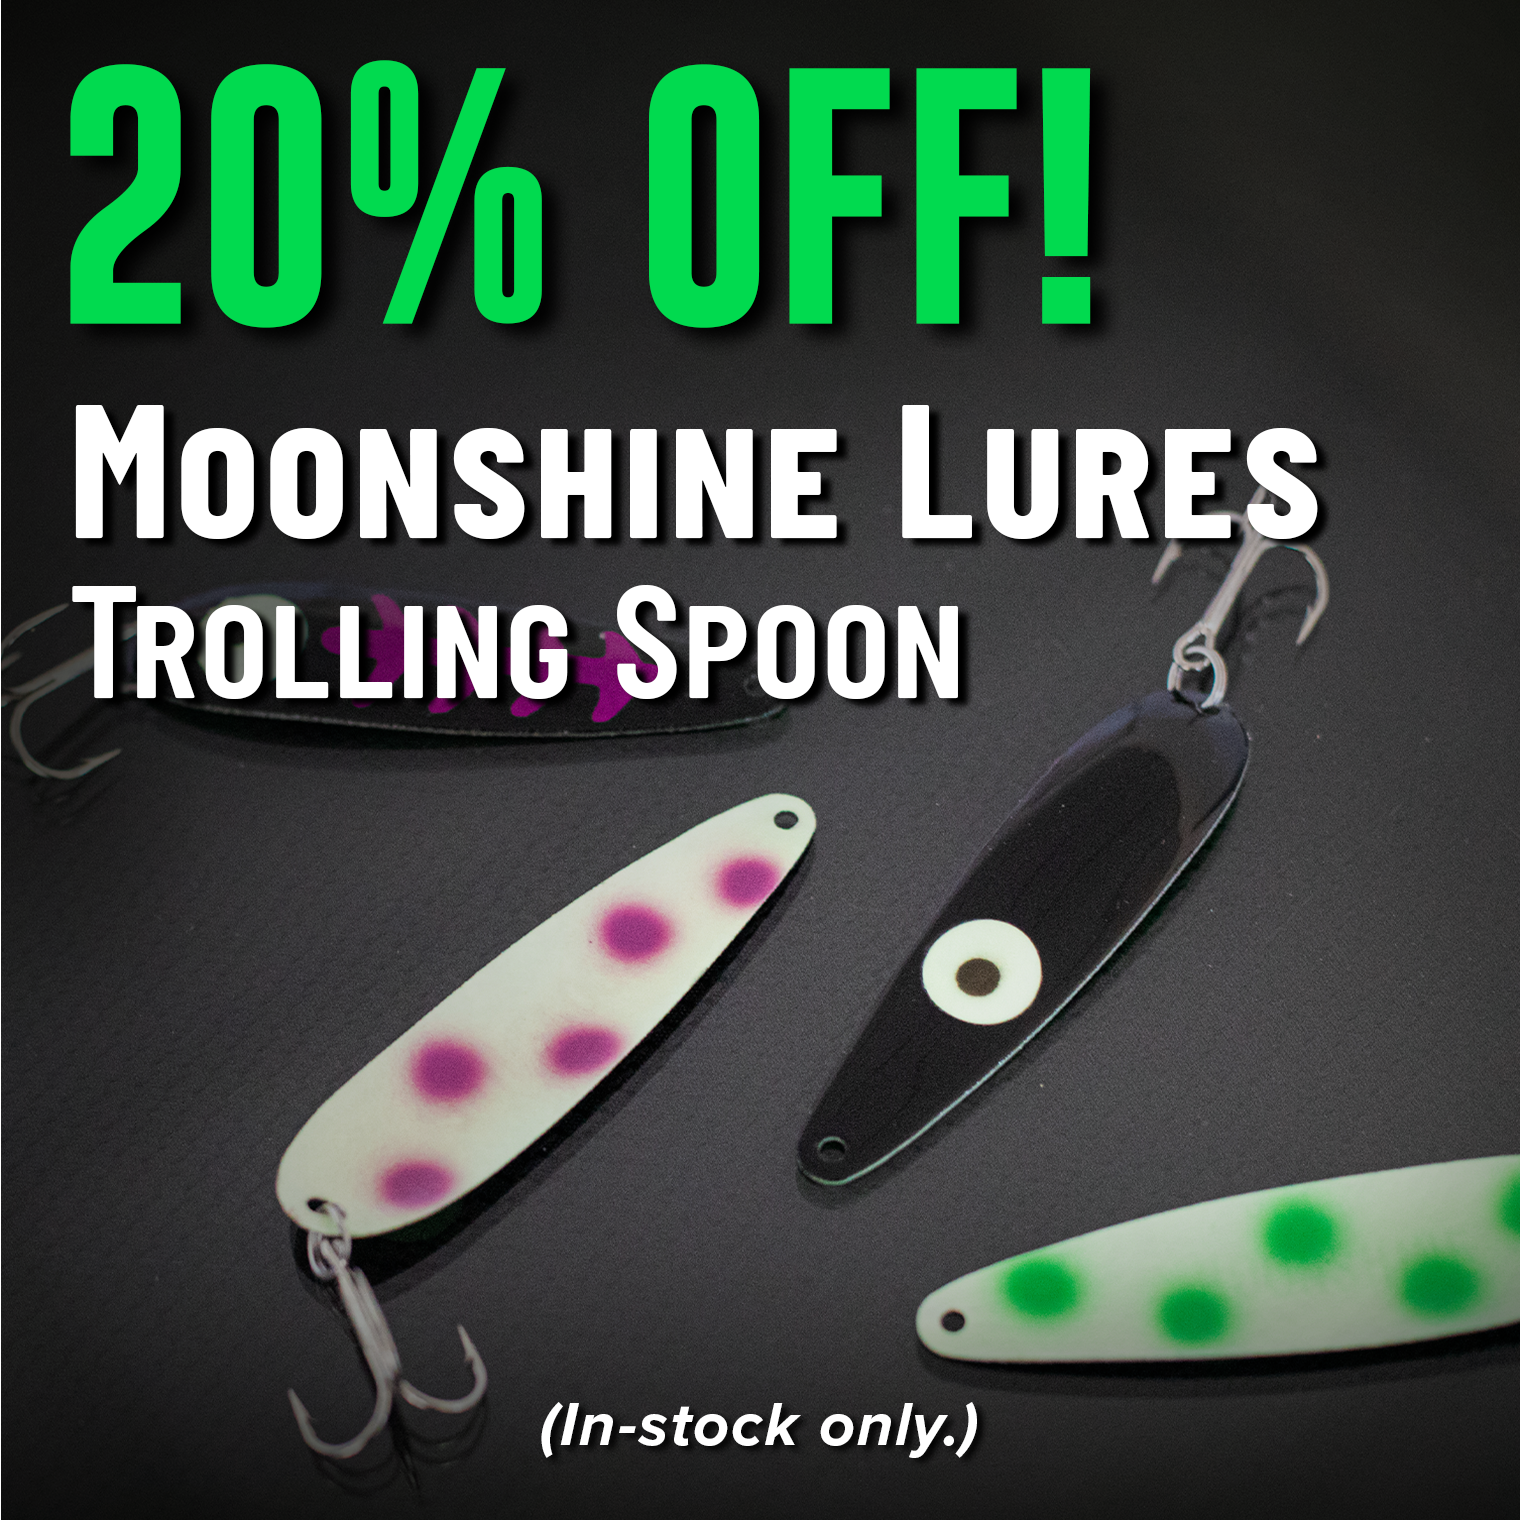 20% Off! Moonshine Lures Trolling Spoon (In-stock only.)